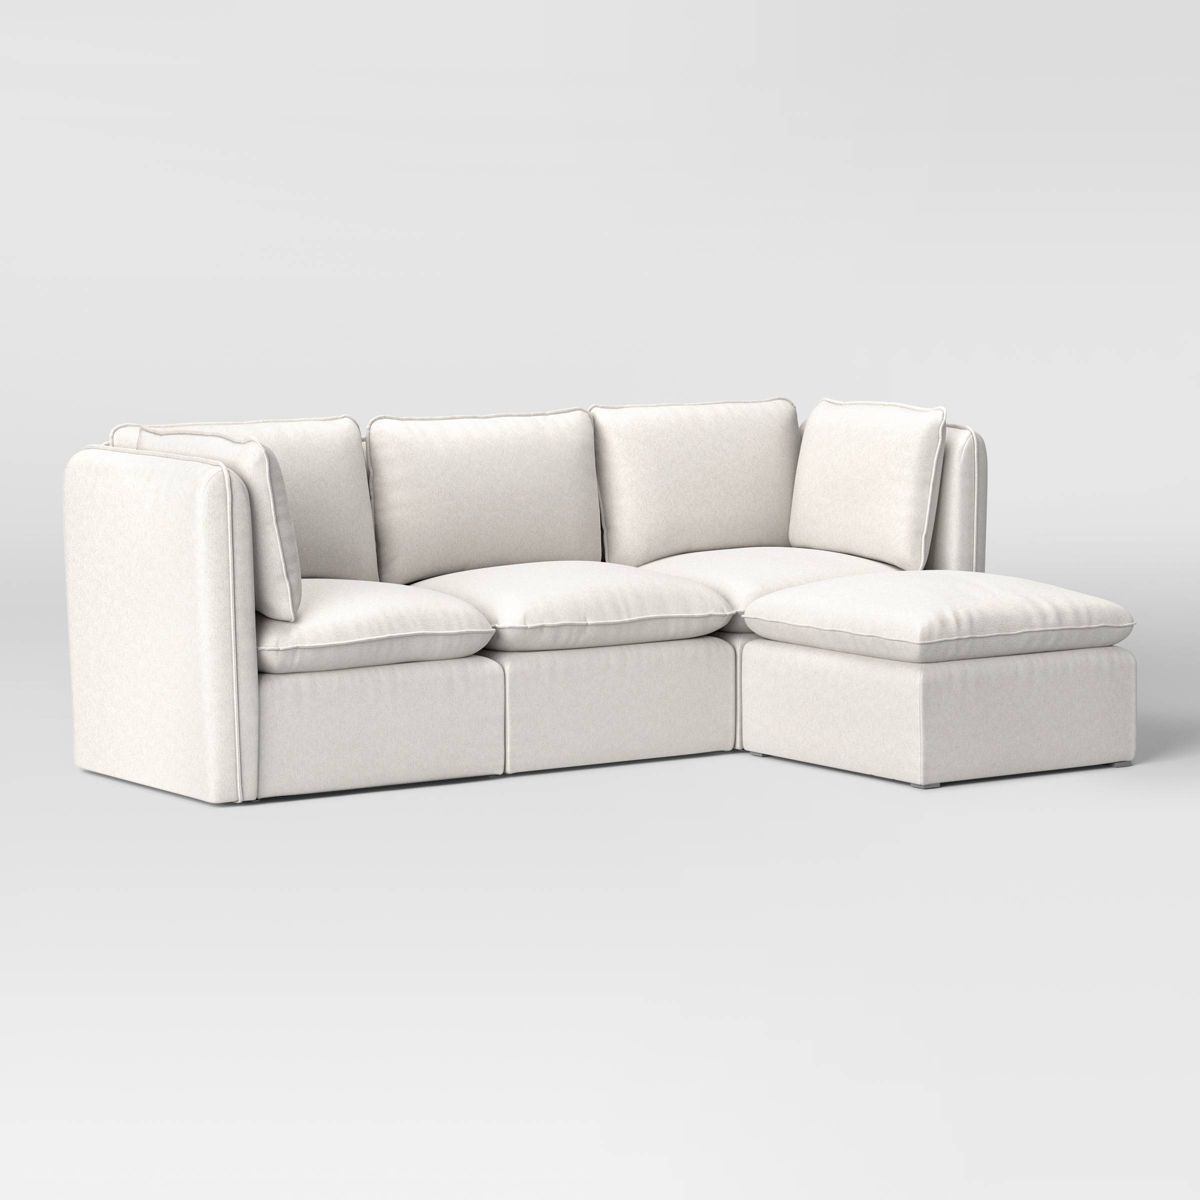 4pc Haven French Seam Modular Sectional - Threshold™ | Target